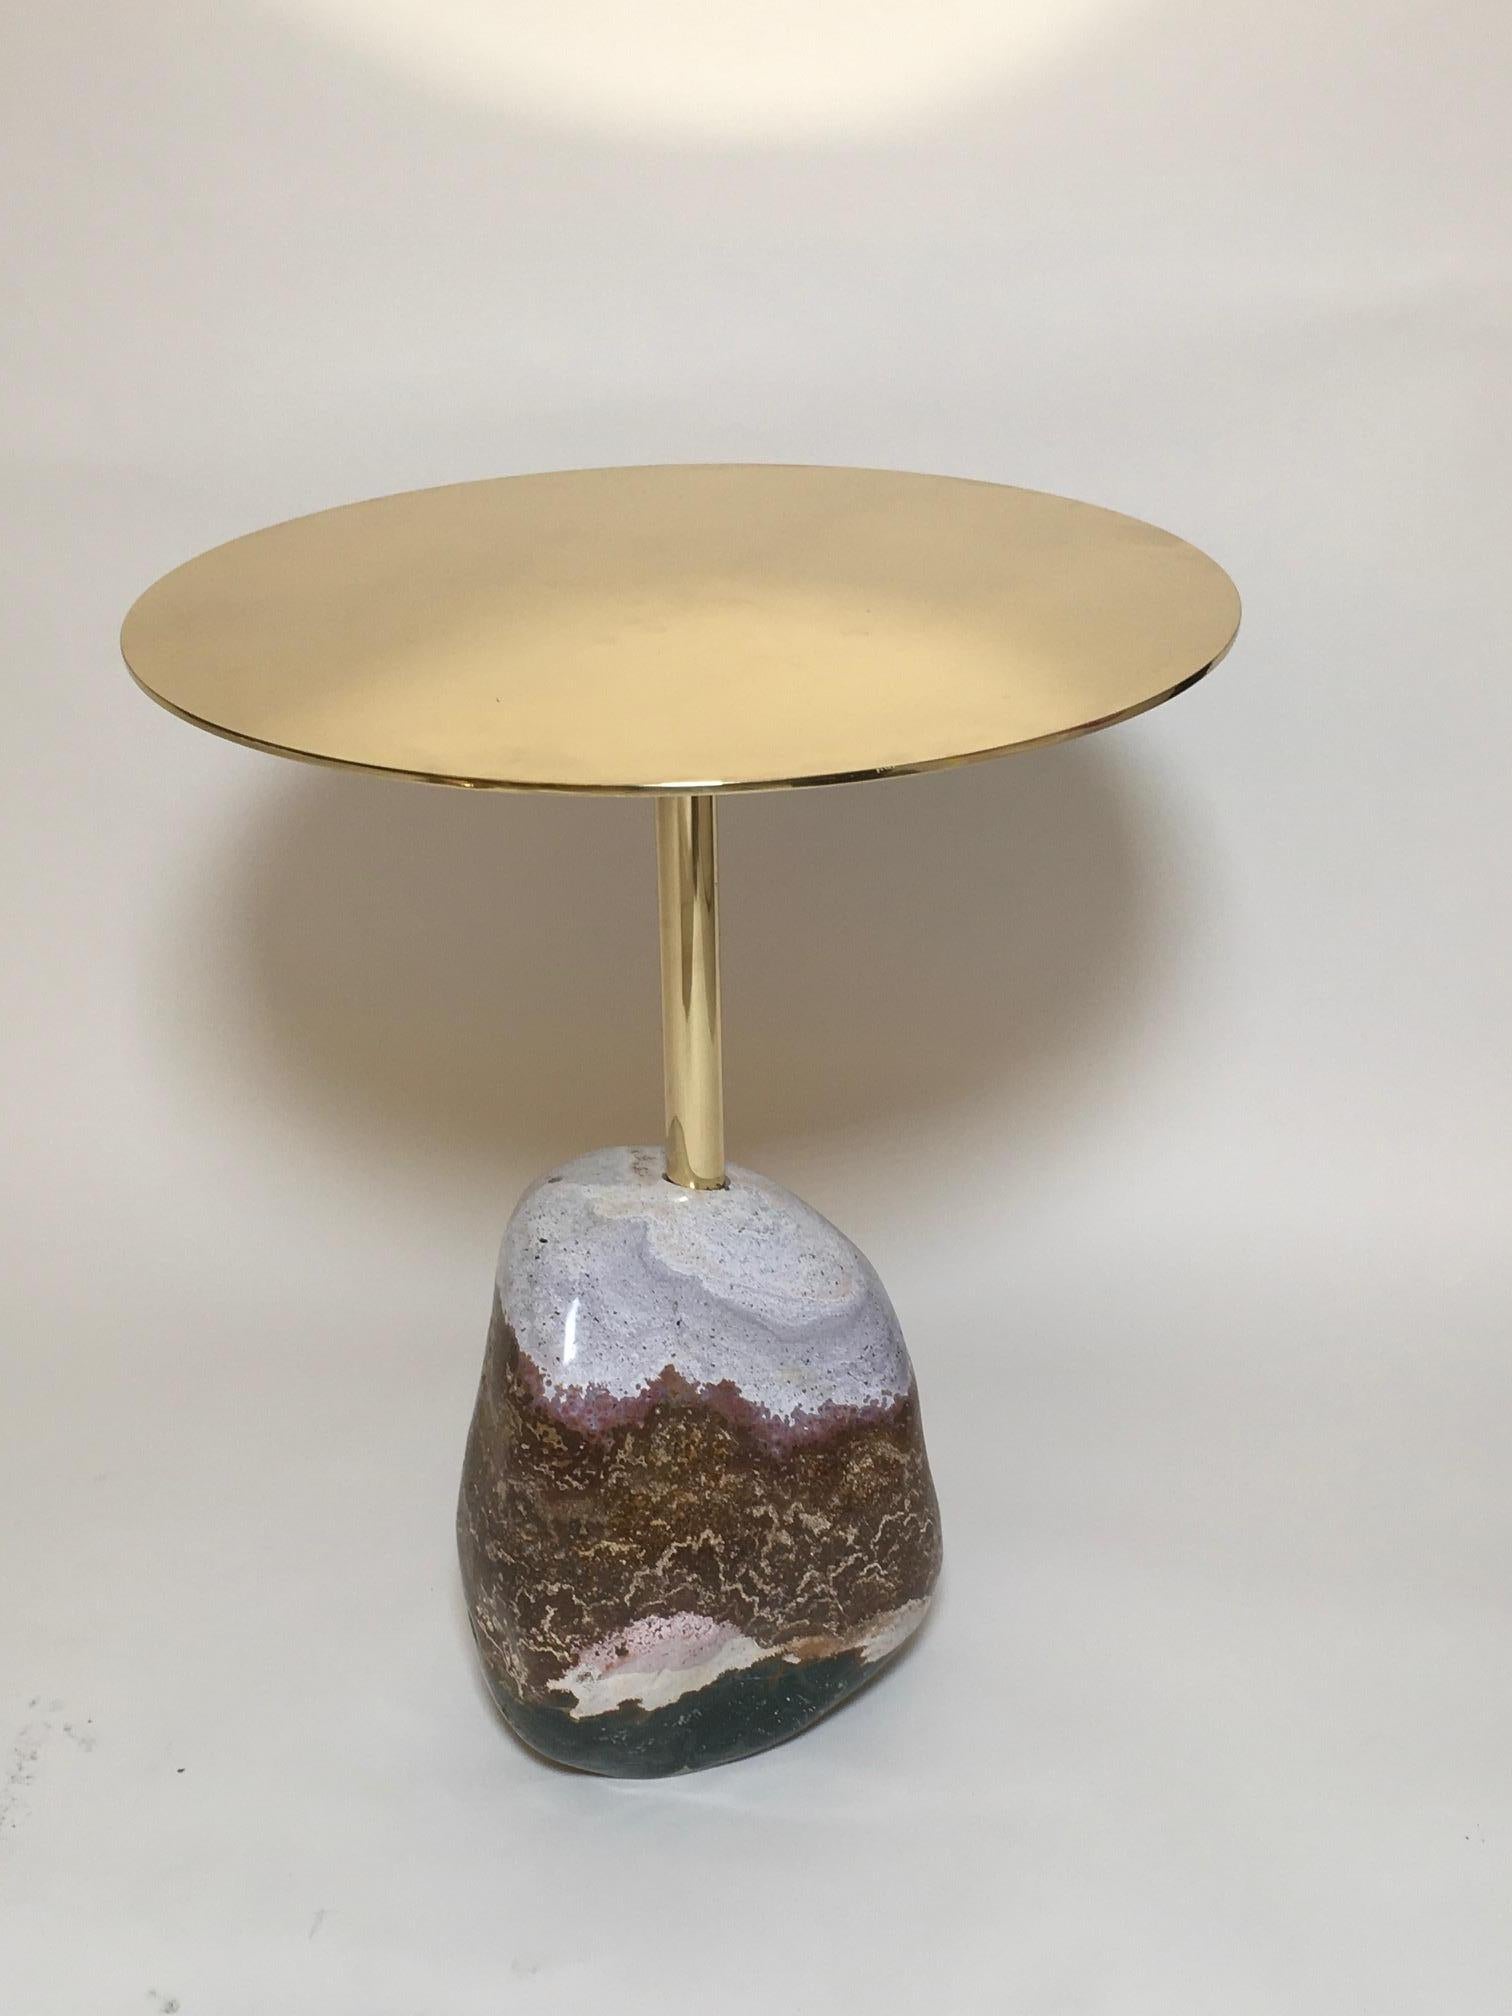 Stone Age gueridon with brass structure and base in semi-precious stone Jasper from Madagascar designed by Studio Superego for Superego Editions.
Jasper size: H 30 cm x W 20 cm x D 20 cm

Biography
Superego editions was born in 2006, performing a